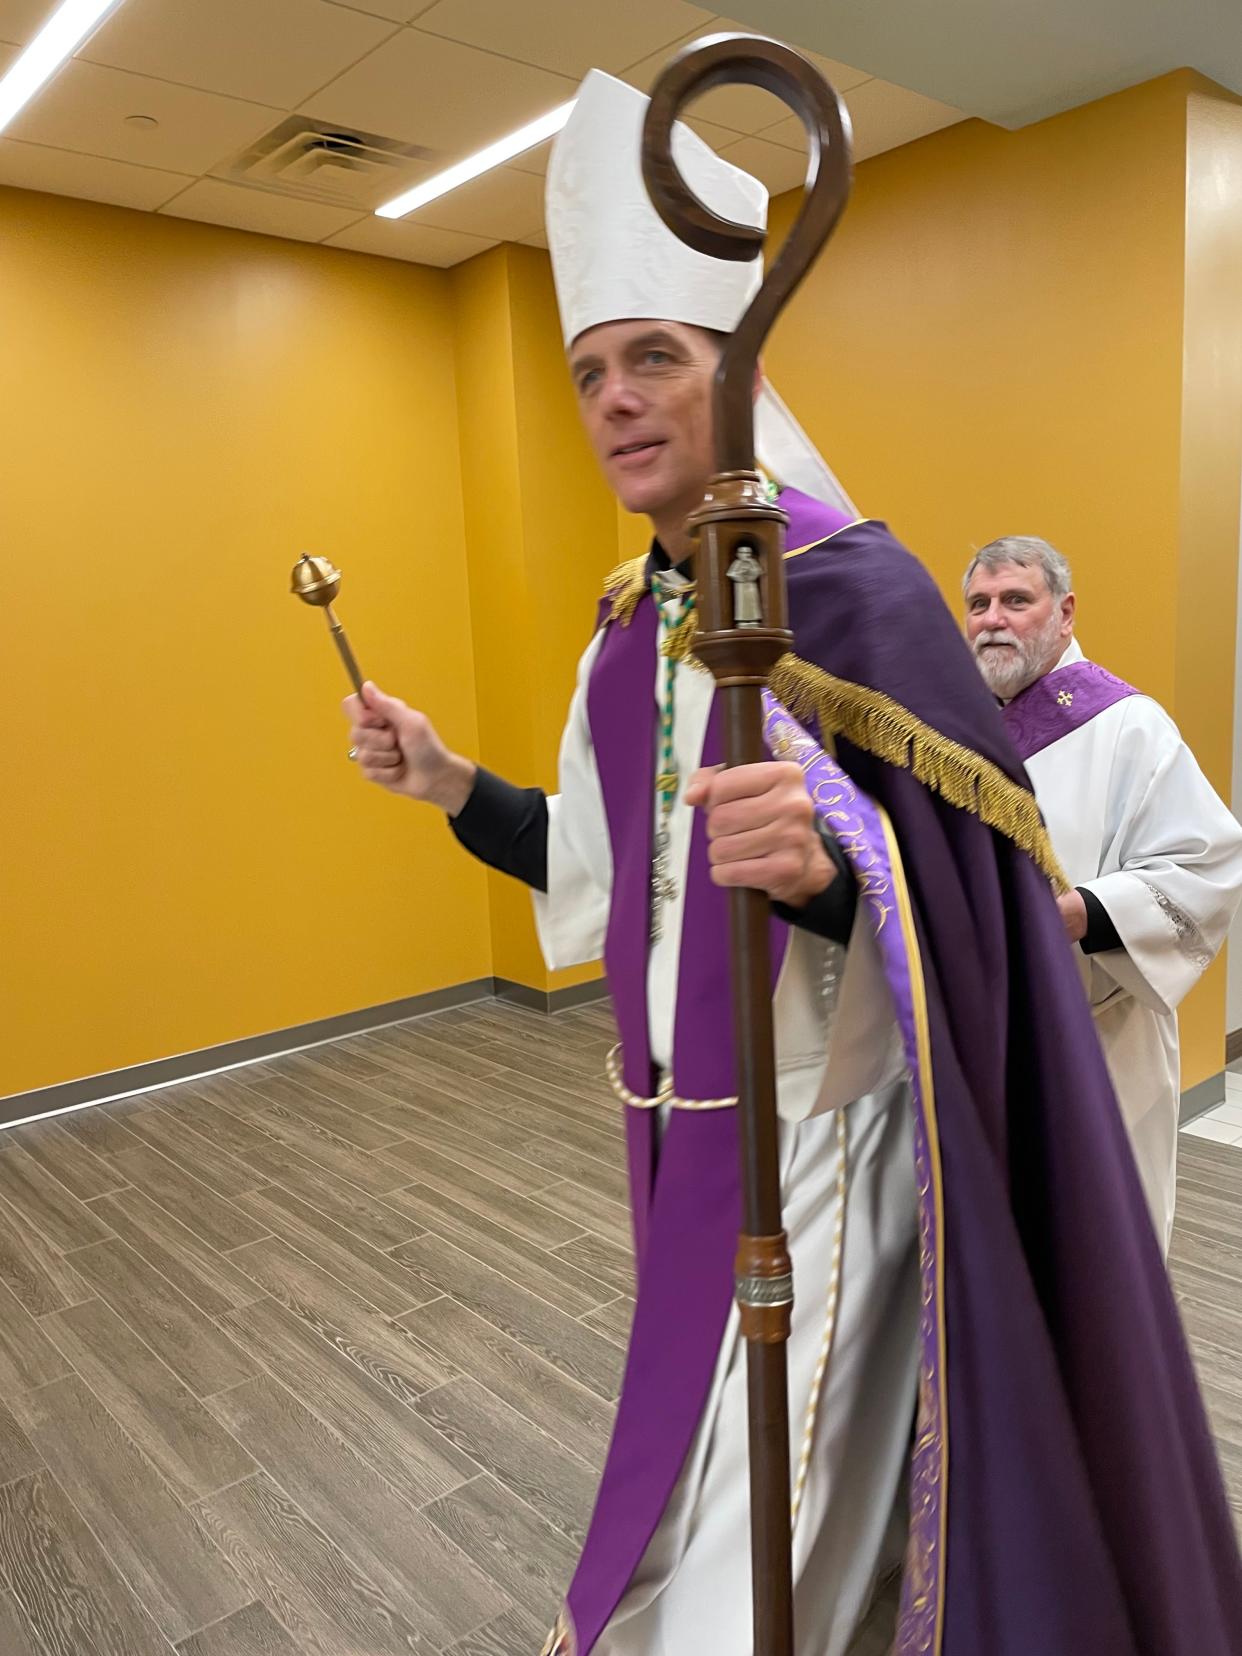 Accompanied by church Deacon Kerry Diver (right), Bishop Stephen D. Parkes of the Diocese of Savannah uses an aspergillum to sprinkle holy water down a hallway of one of the newly-constructed buildings at St. Teresa of Avila Catholic Church in Grovetown.